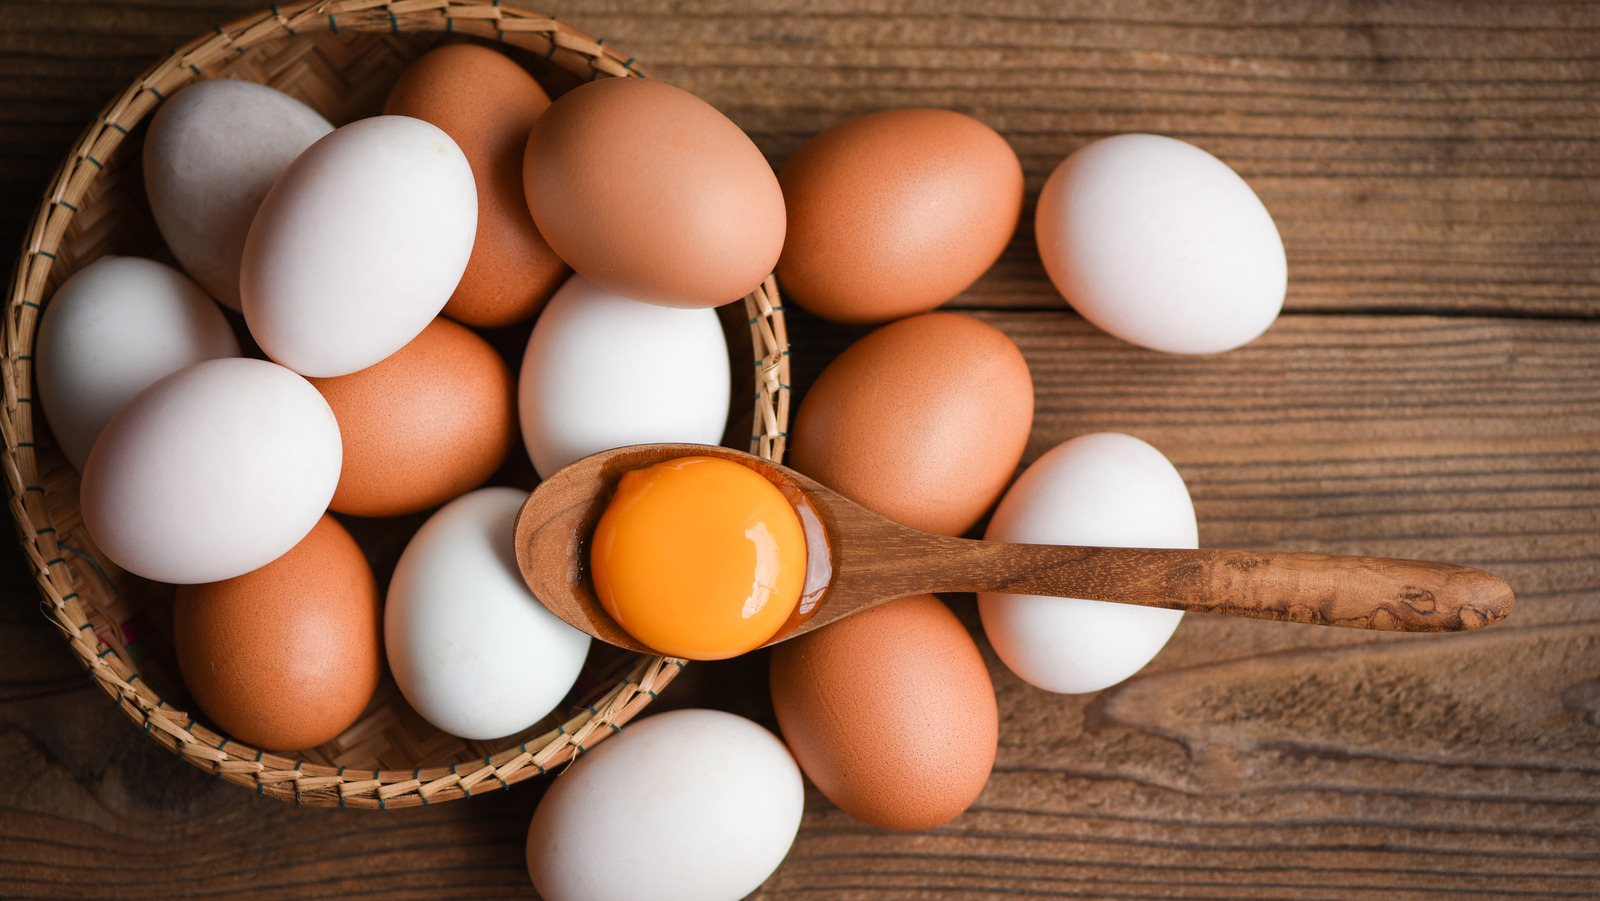  Why the eggs are beneficial to consult an expert on ED?￼